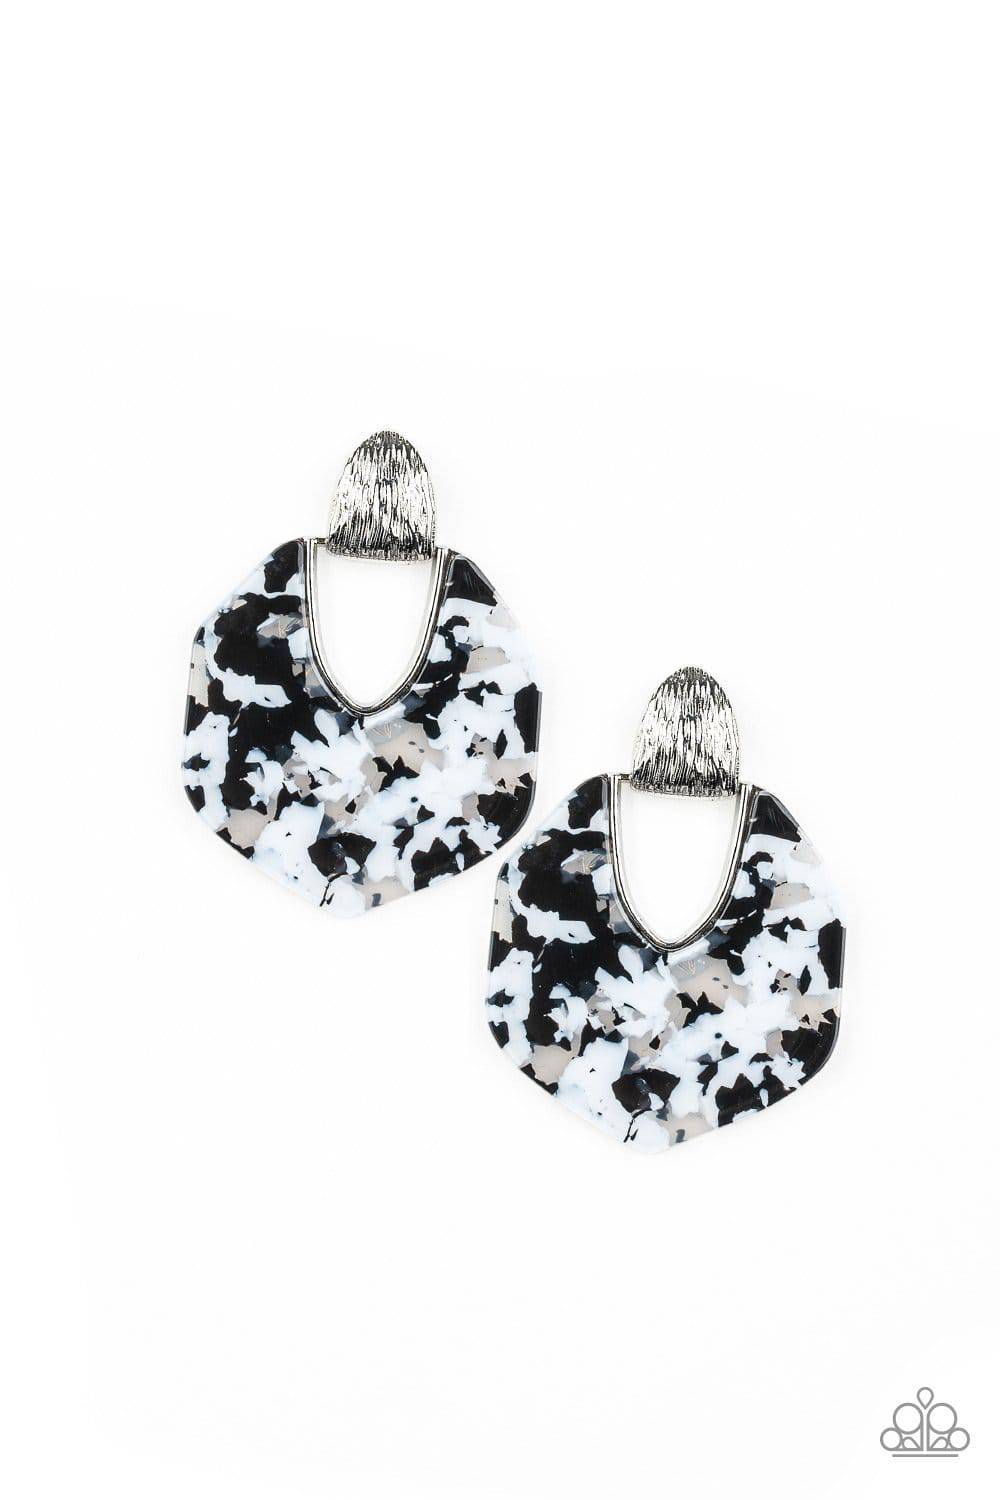 My Animal Spirit - White Faux Marble Acrylic Earrings - Paparazzi Accessories - GlaMarous Titi Jewels